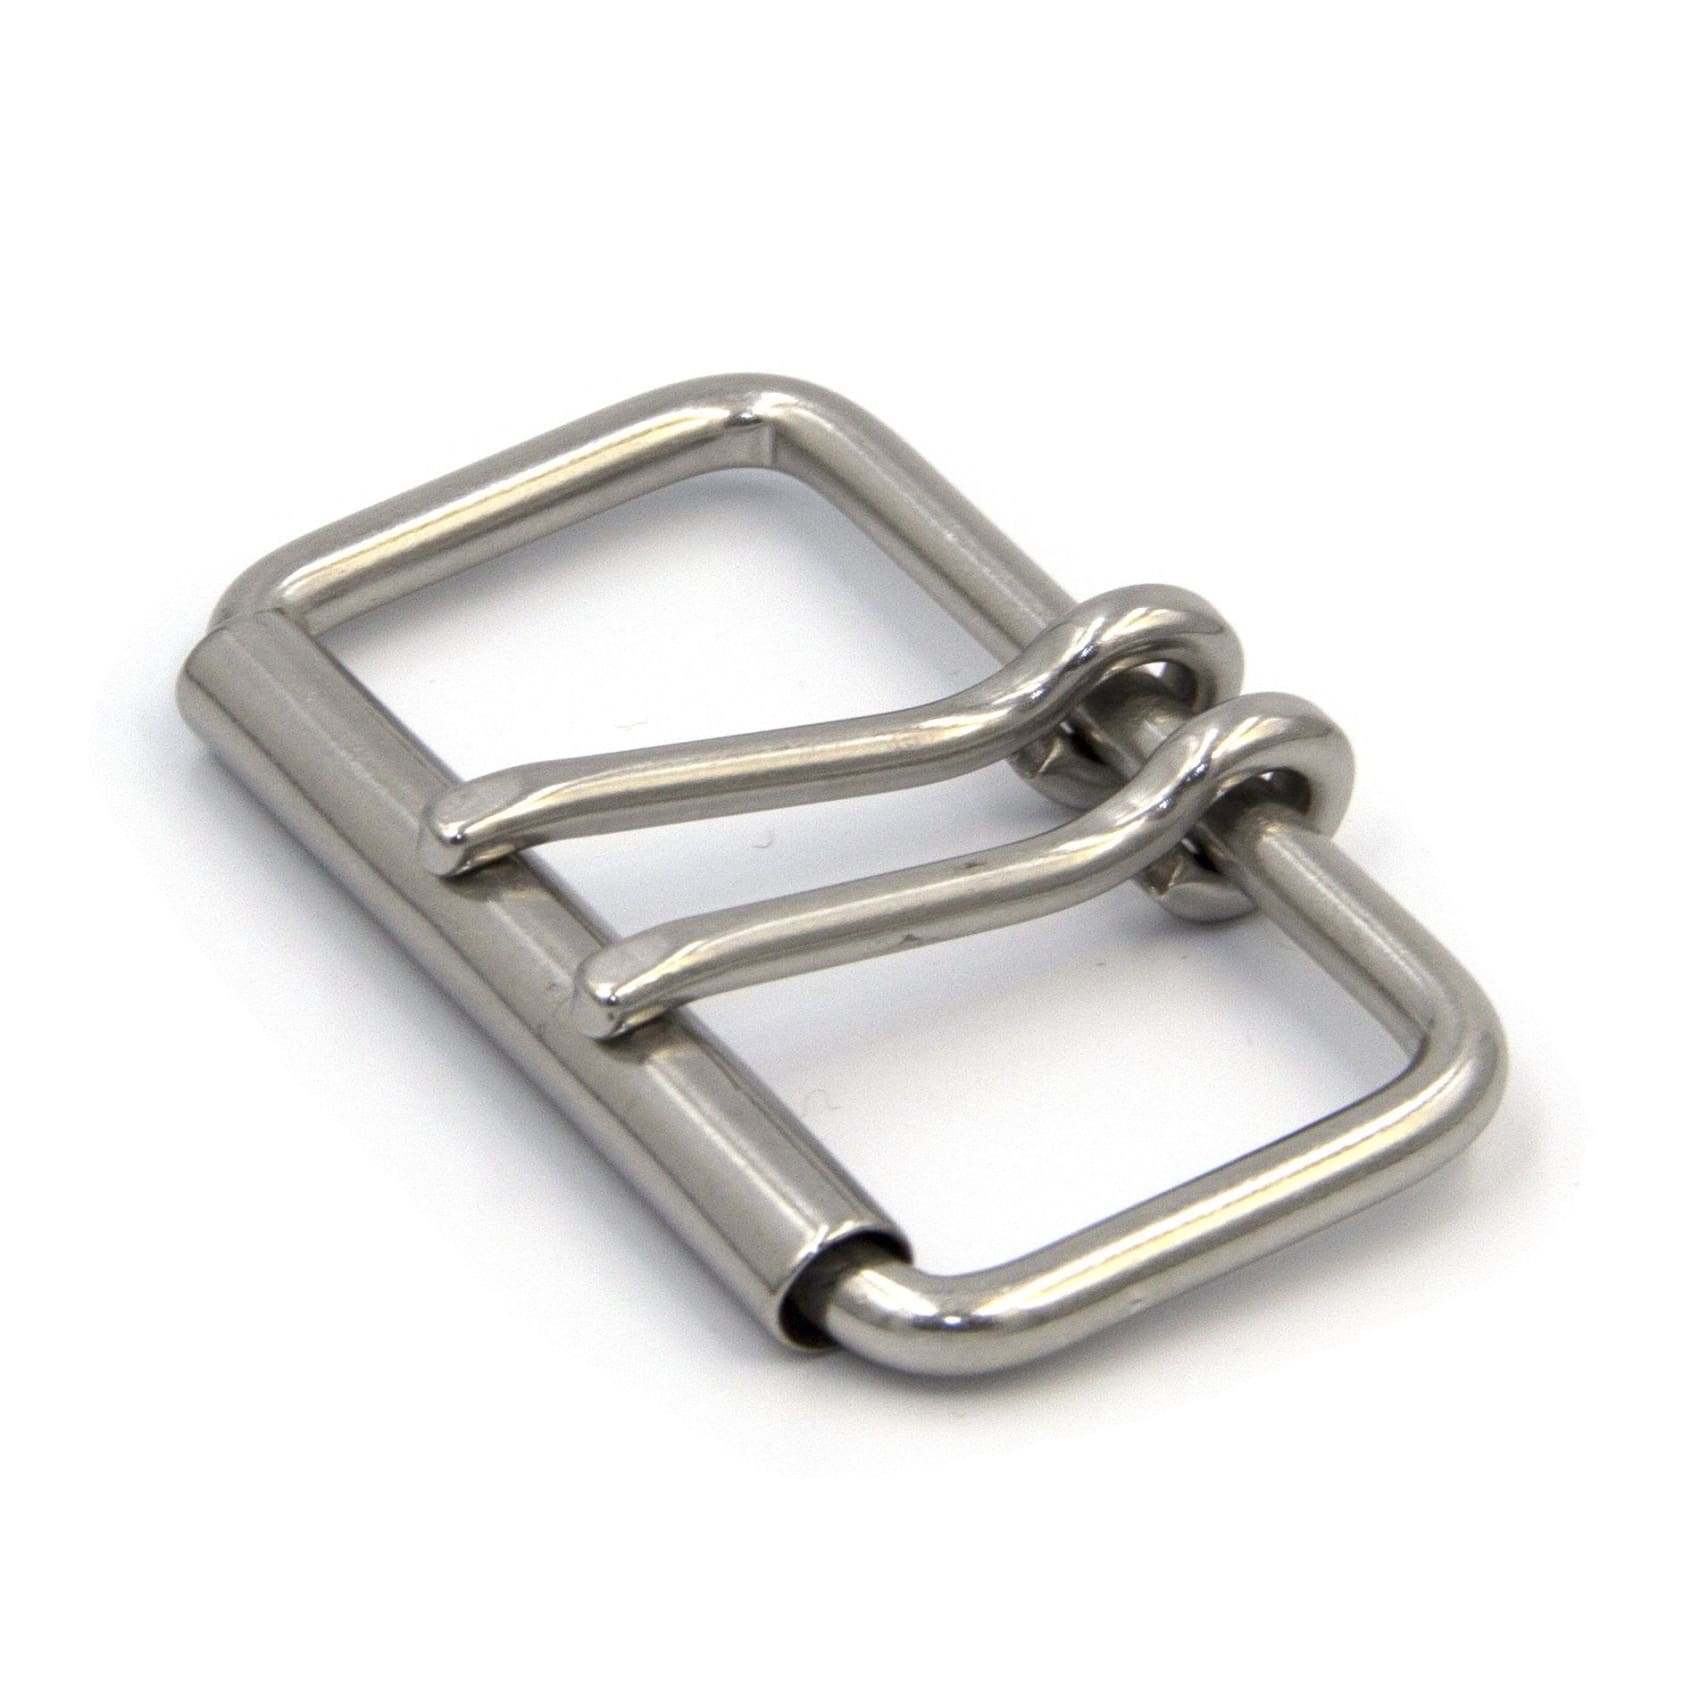 60mm Double Pin Roller Bar Belt Buckle Stainless Steel Rolling Buckle  Saddle Buckle Halter Buckles Harness Fitting – Metal Field Shop